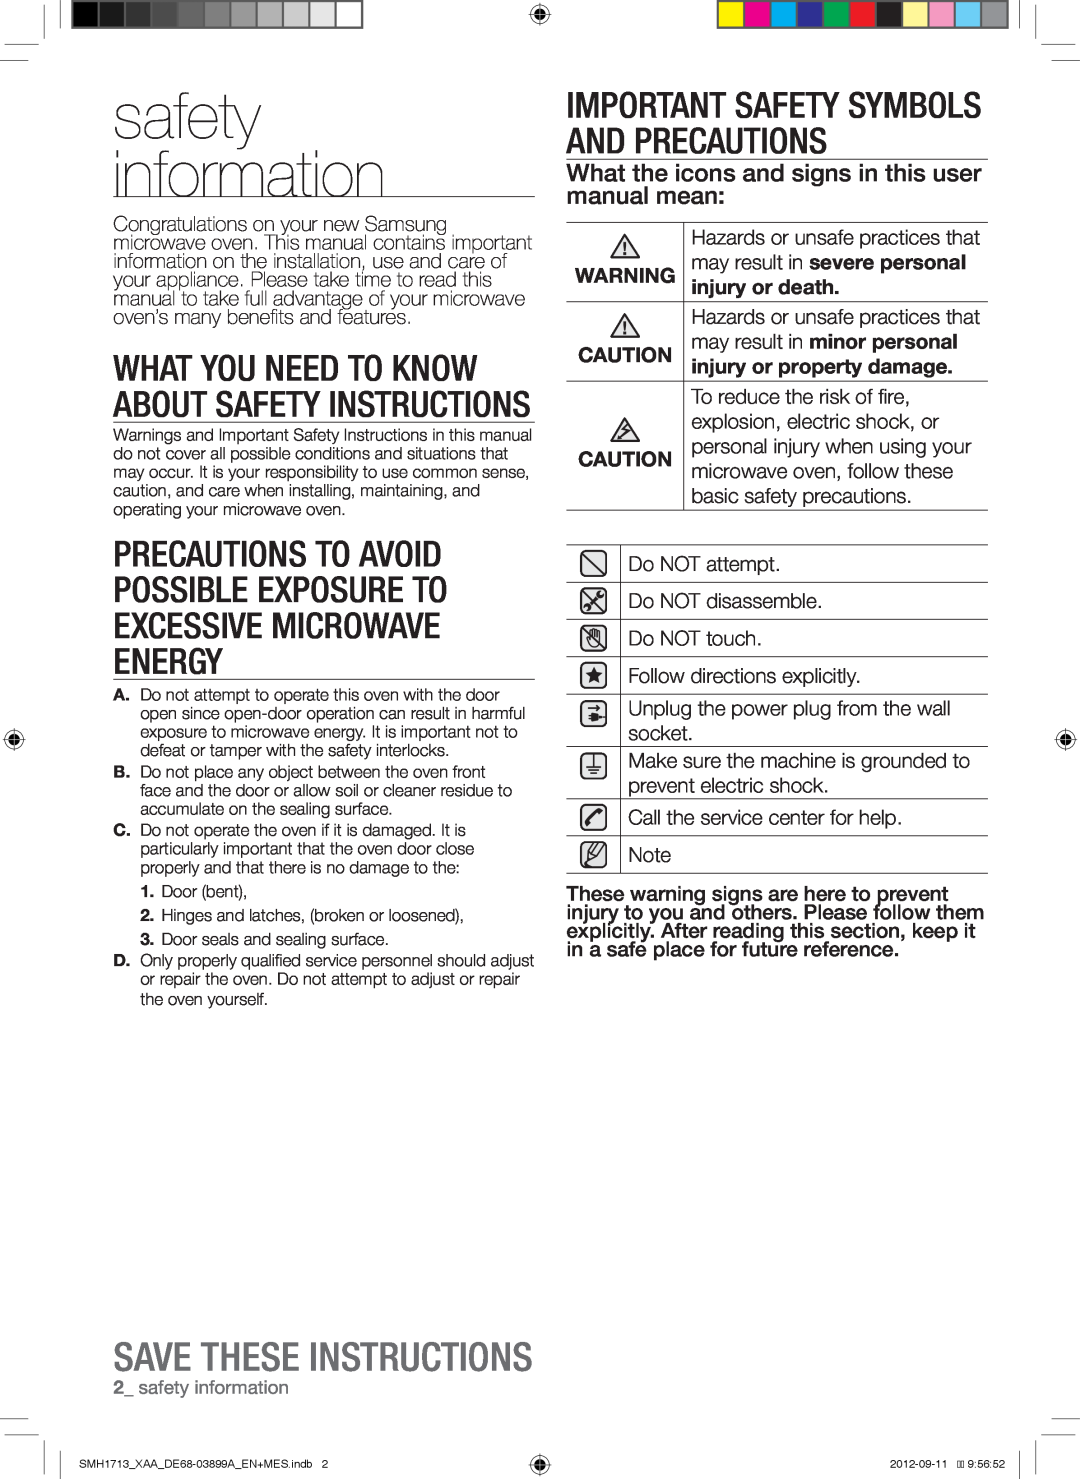 Samsung SMH1713W, SMH1713S safety information, Important Safety Symbols And Precautions, may result in severe personal 